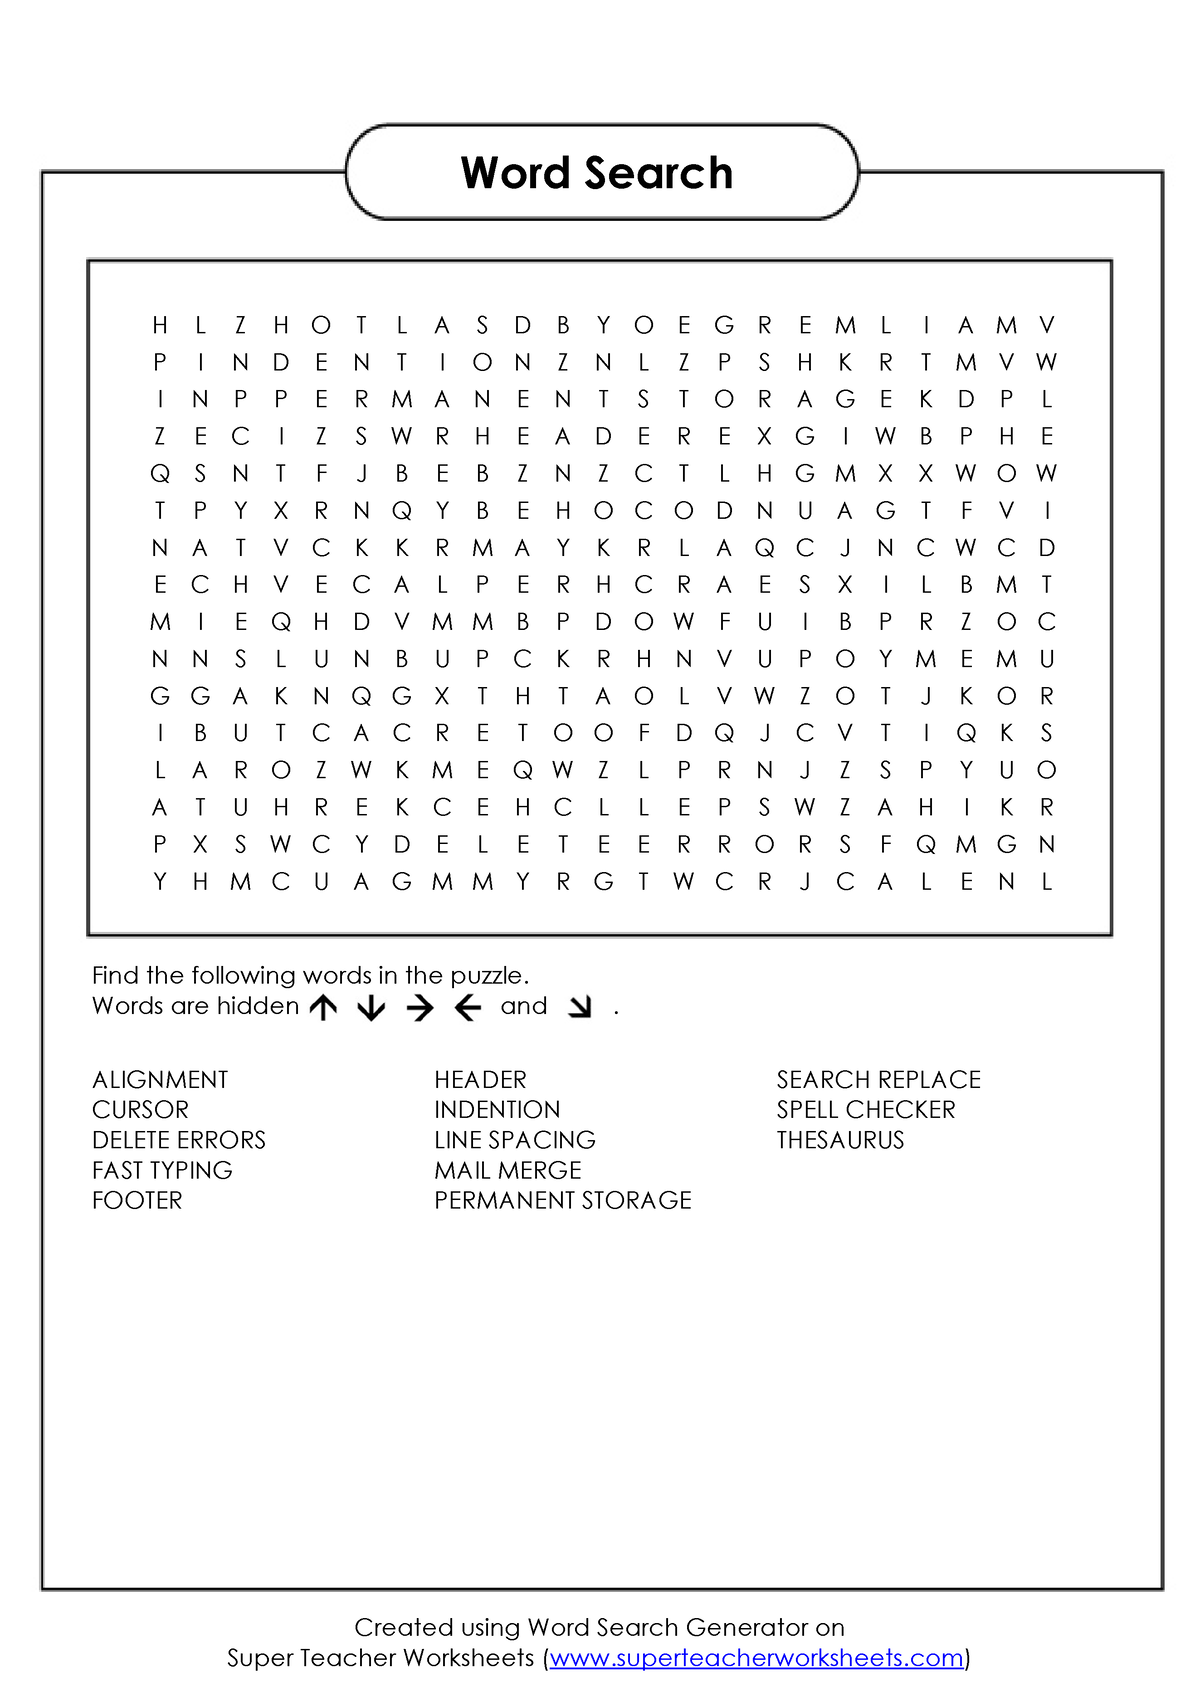 Super Teacher Worksheets Word Search - Word Search H L Z H O T L A S D ...